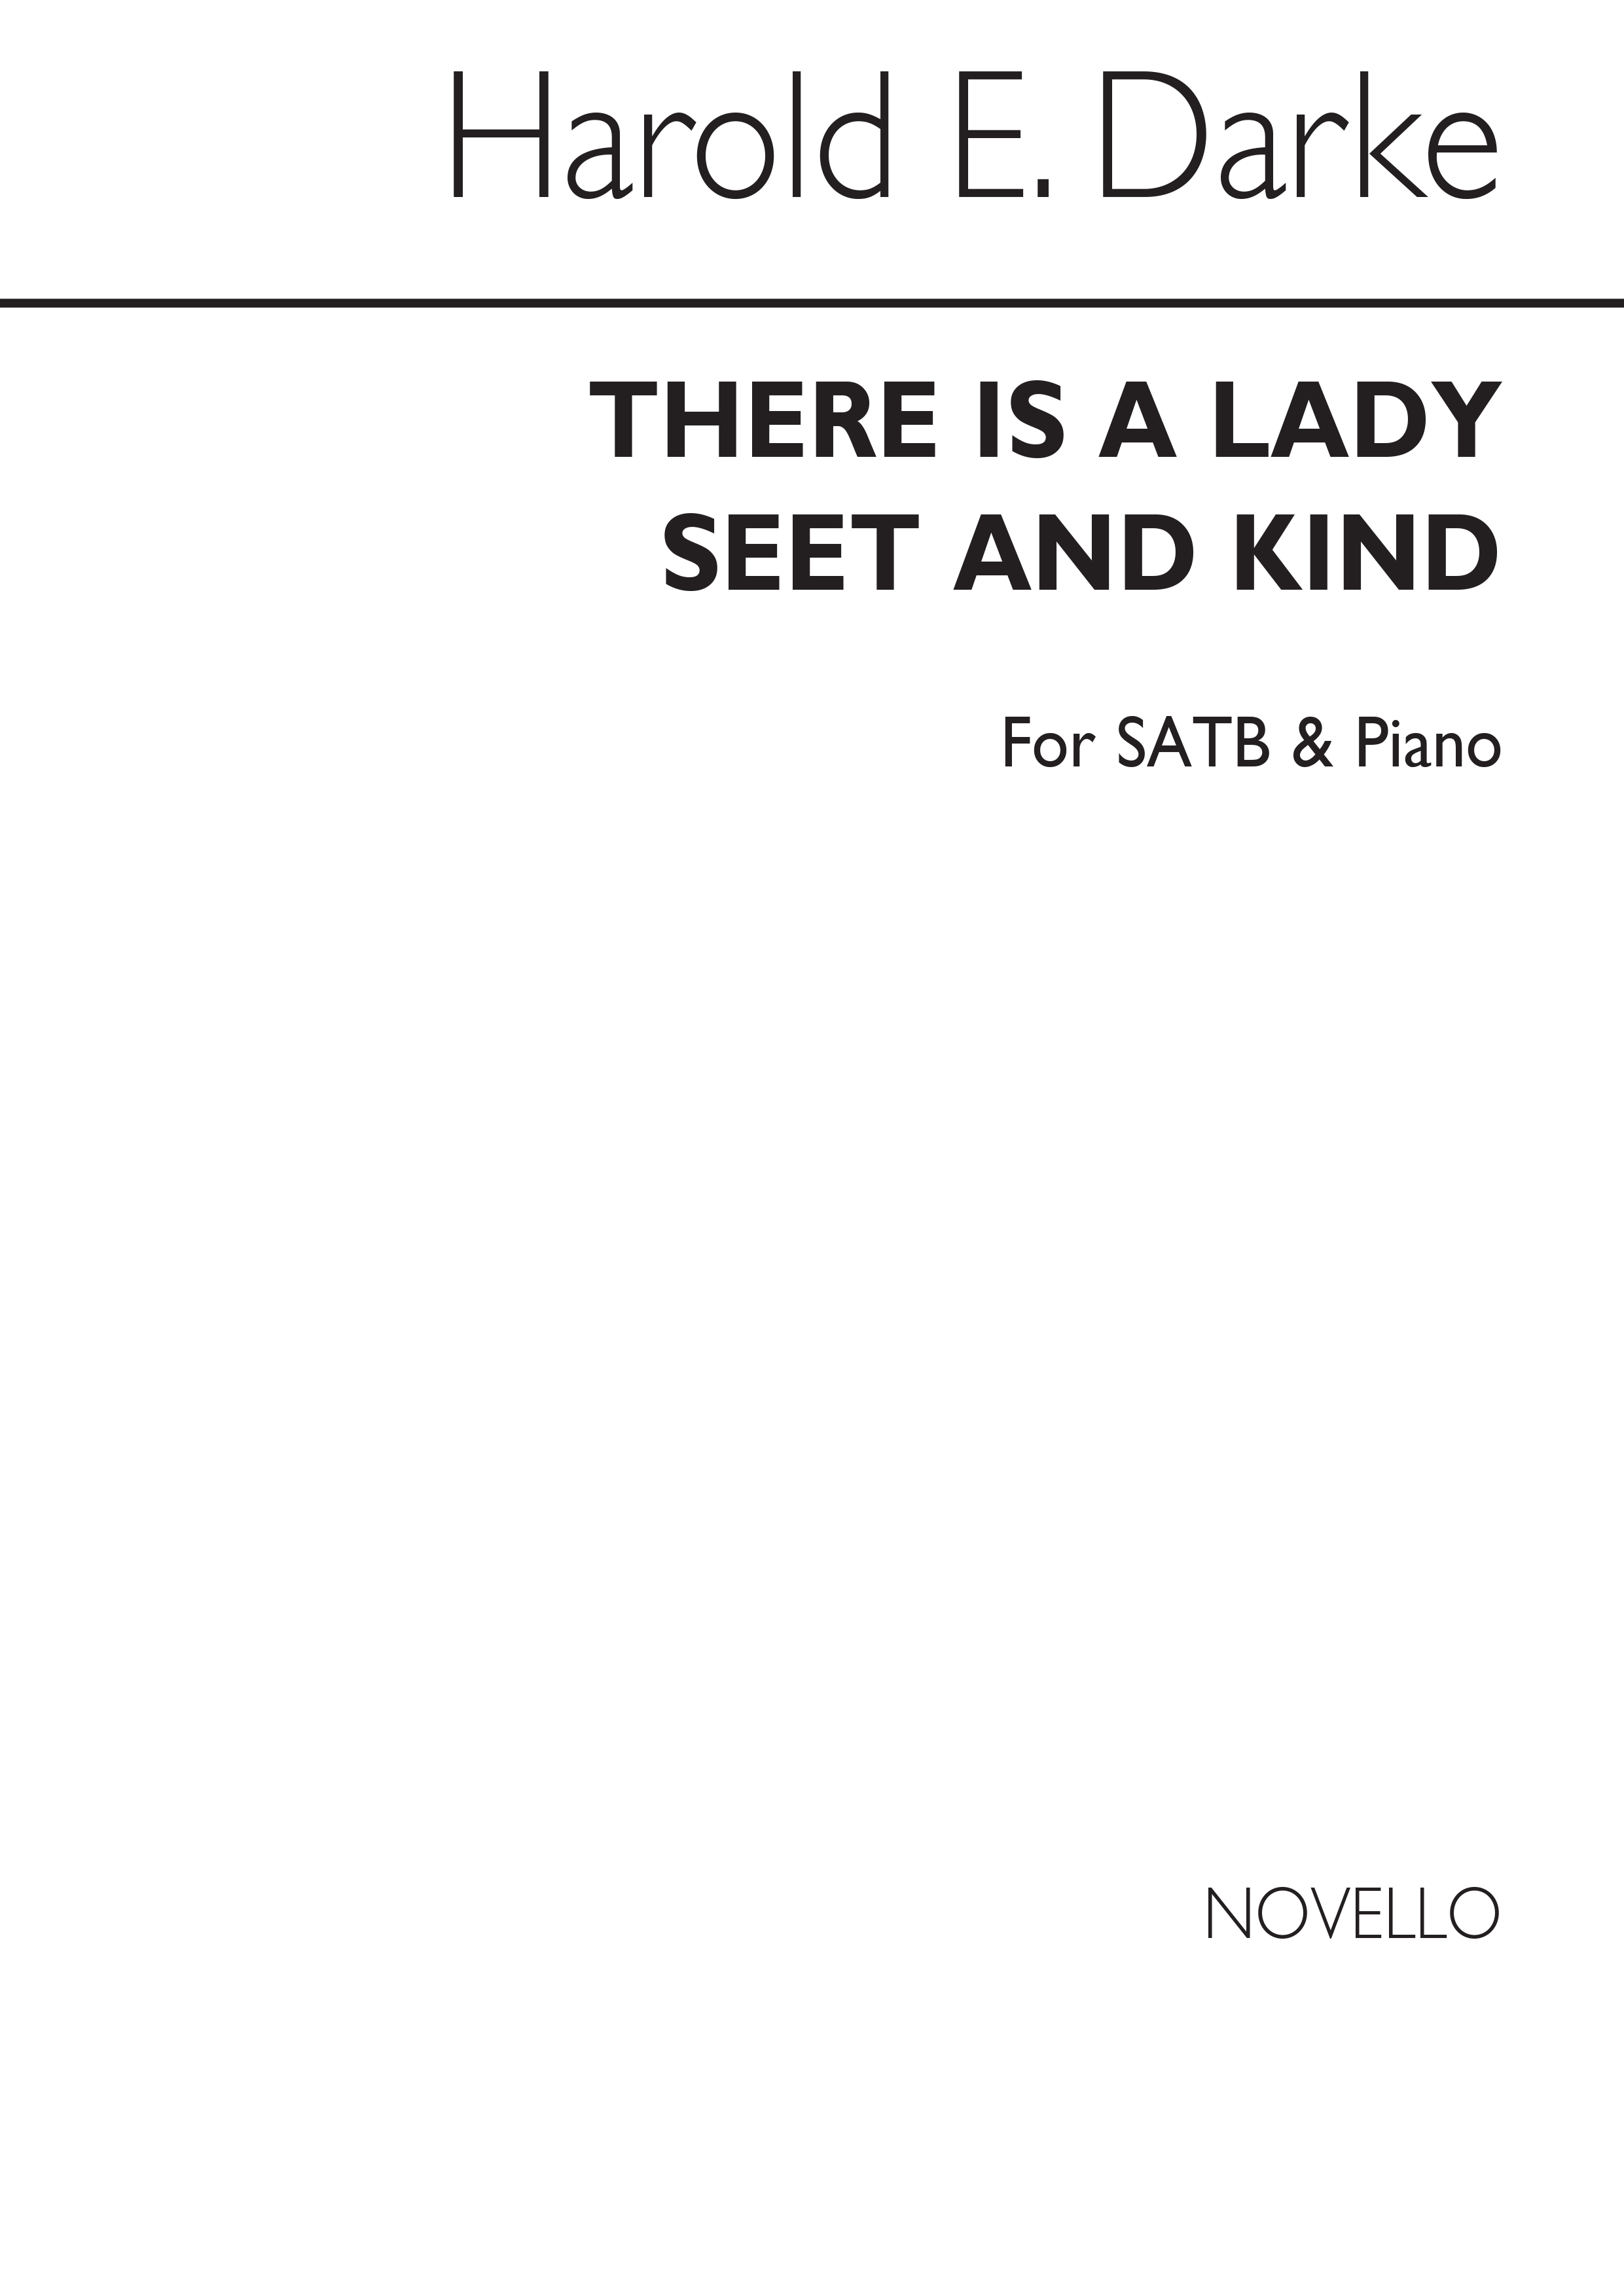 Harold Darke: There Is A Lady Sweet And Kind Satb/Piano